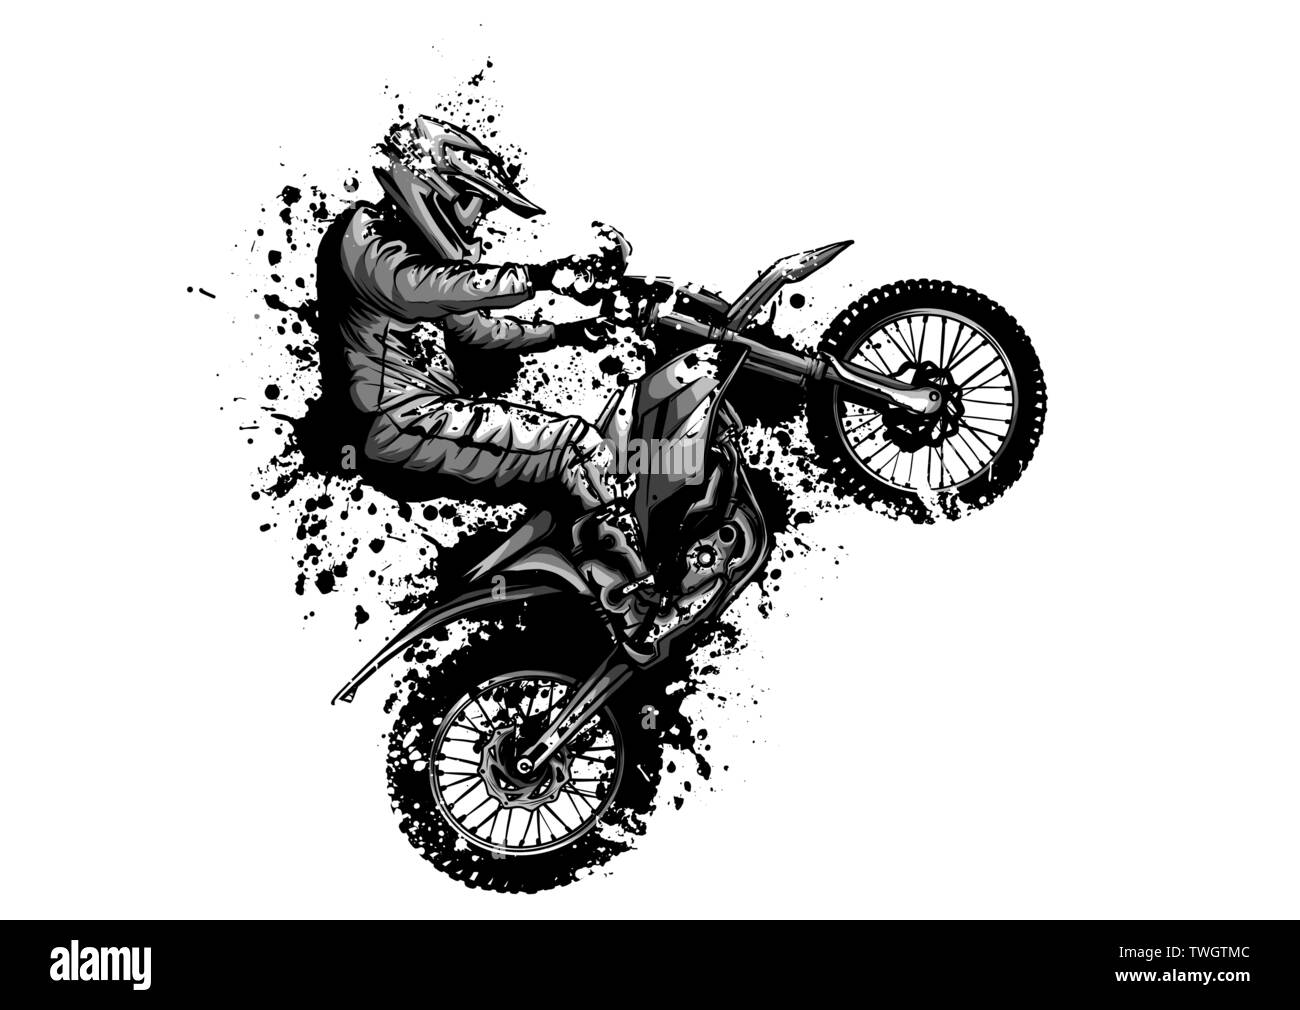 Dirt Bike Black and White Stock Photos & Images - Alamy